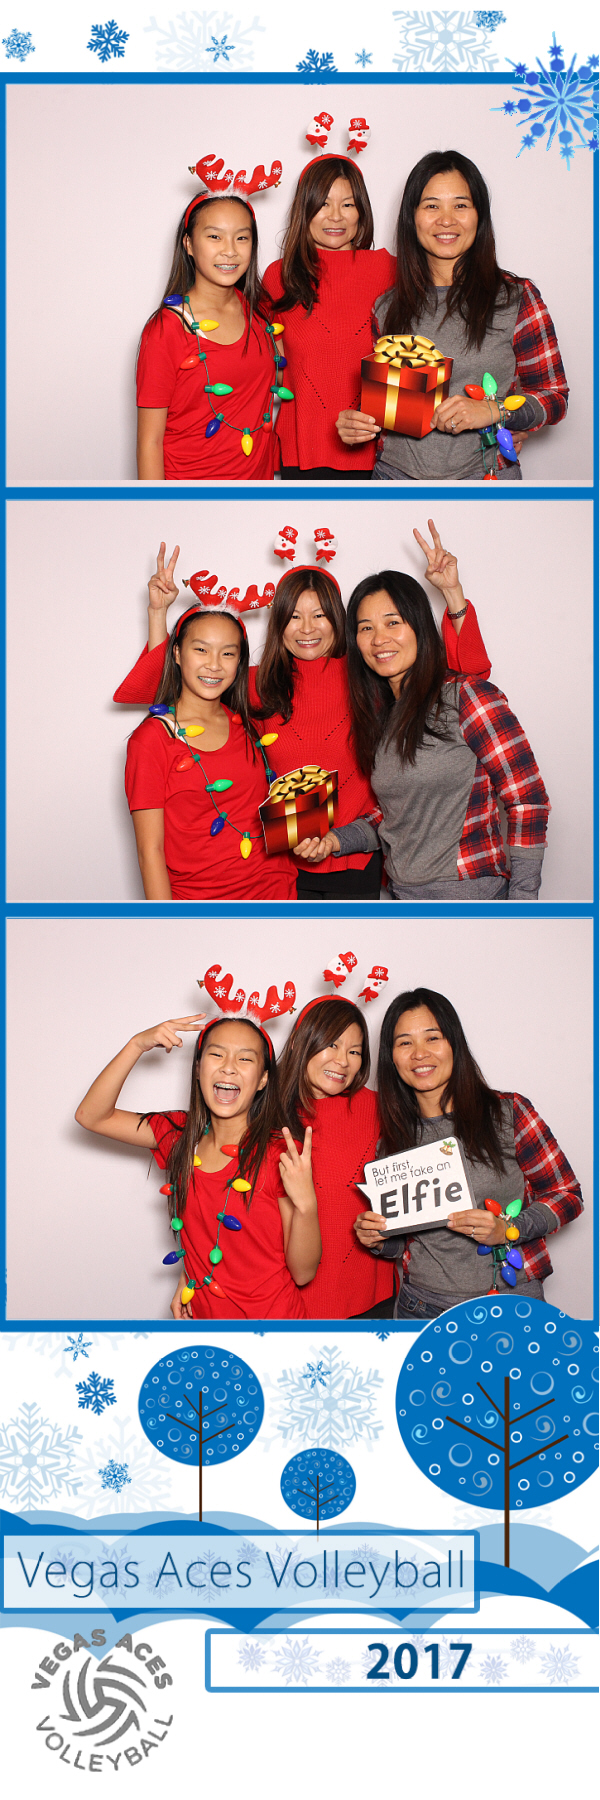 2x6 photo strip with three women posing with props and white backdrop